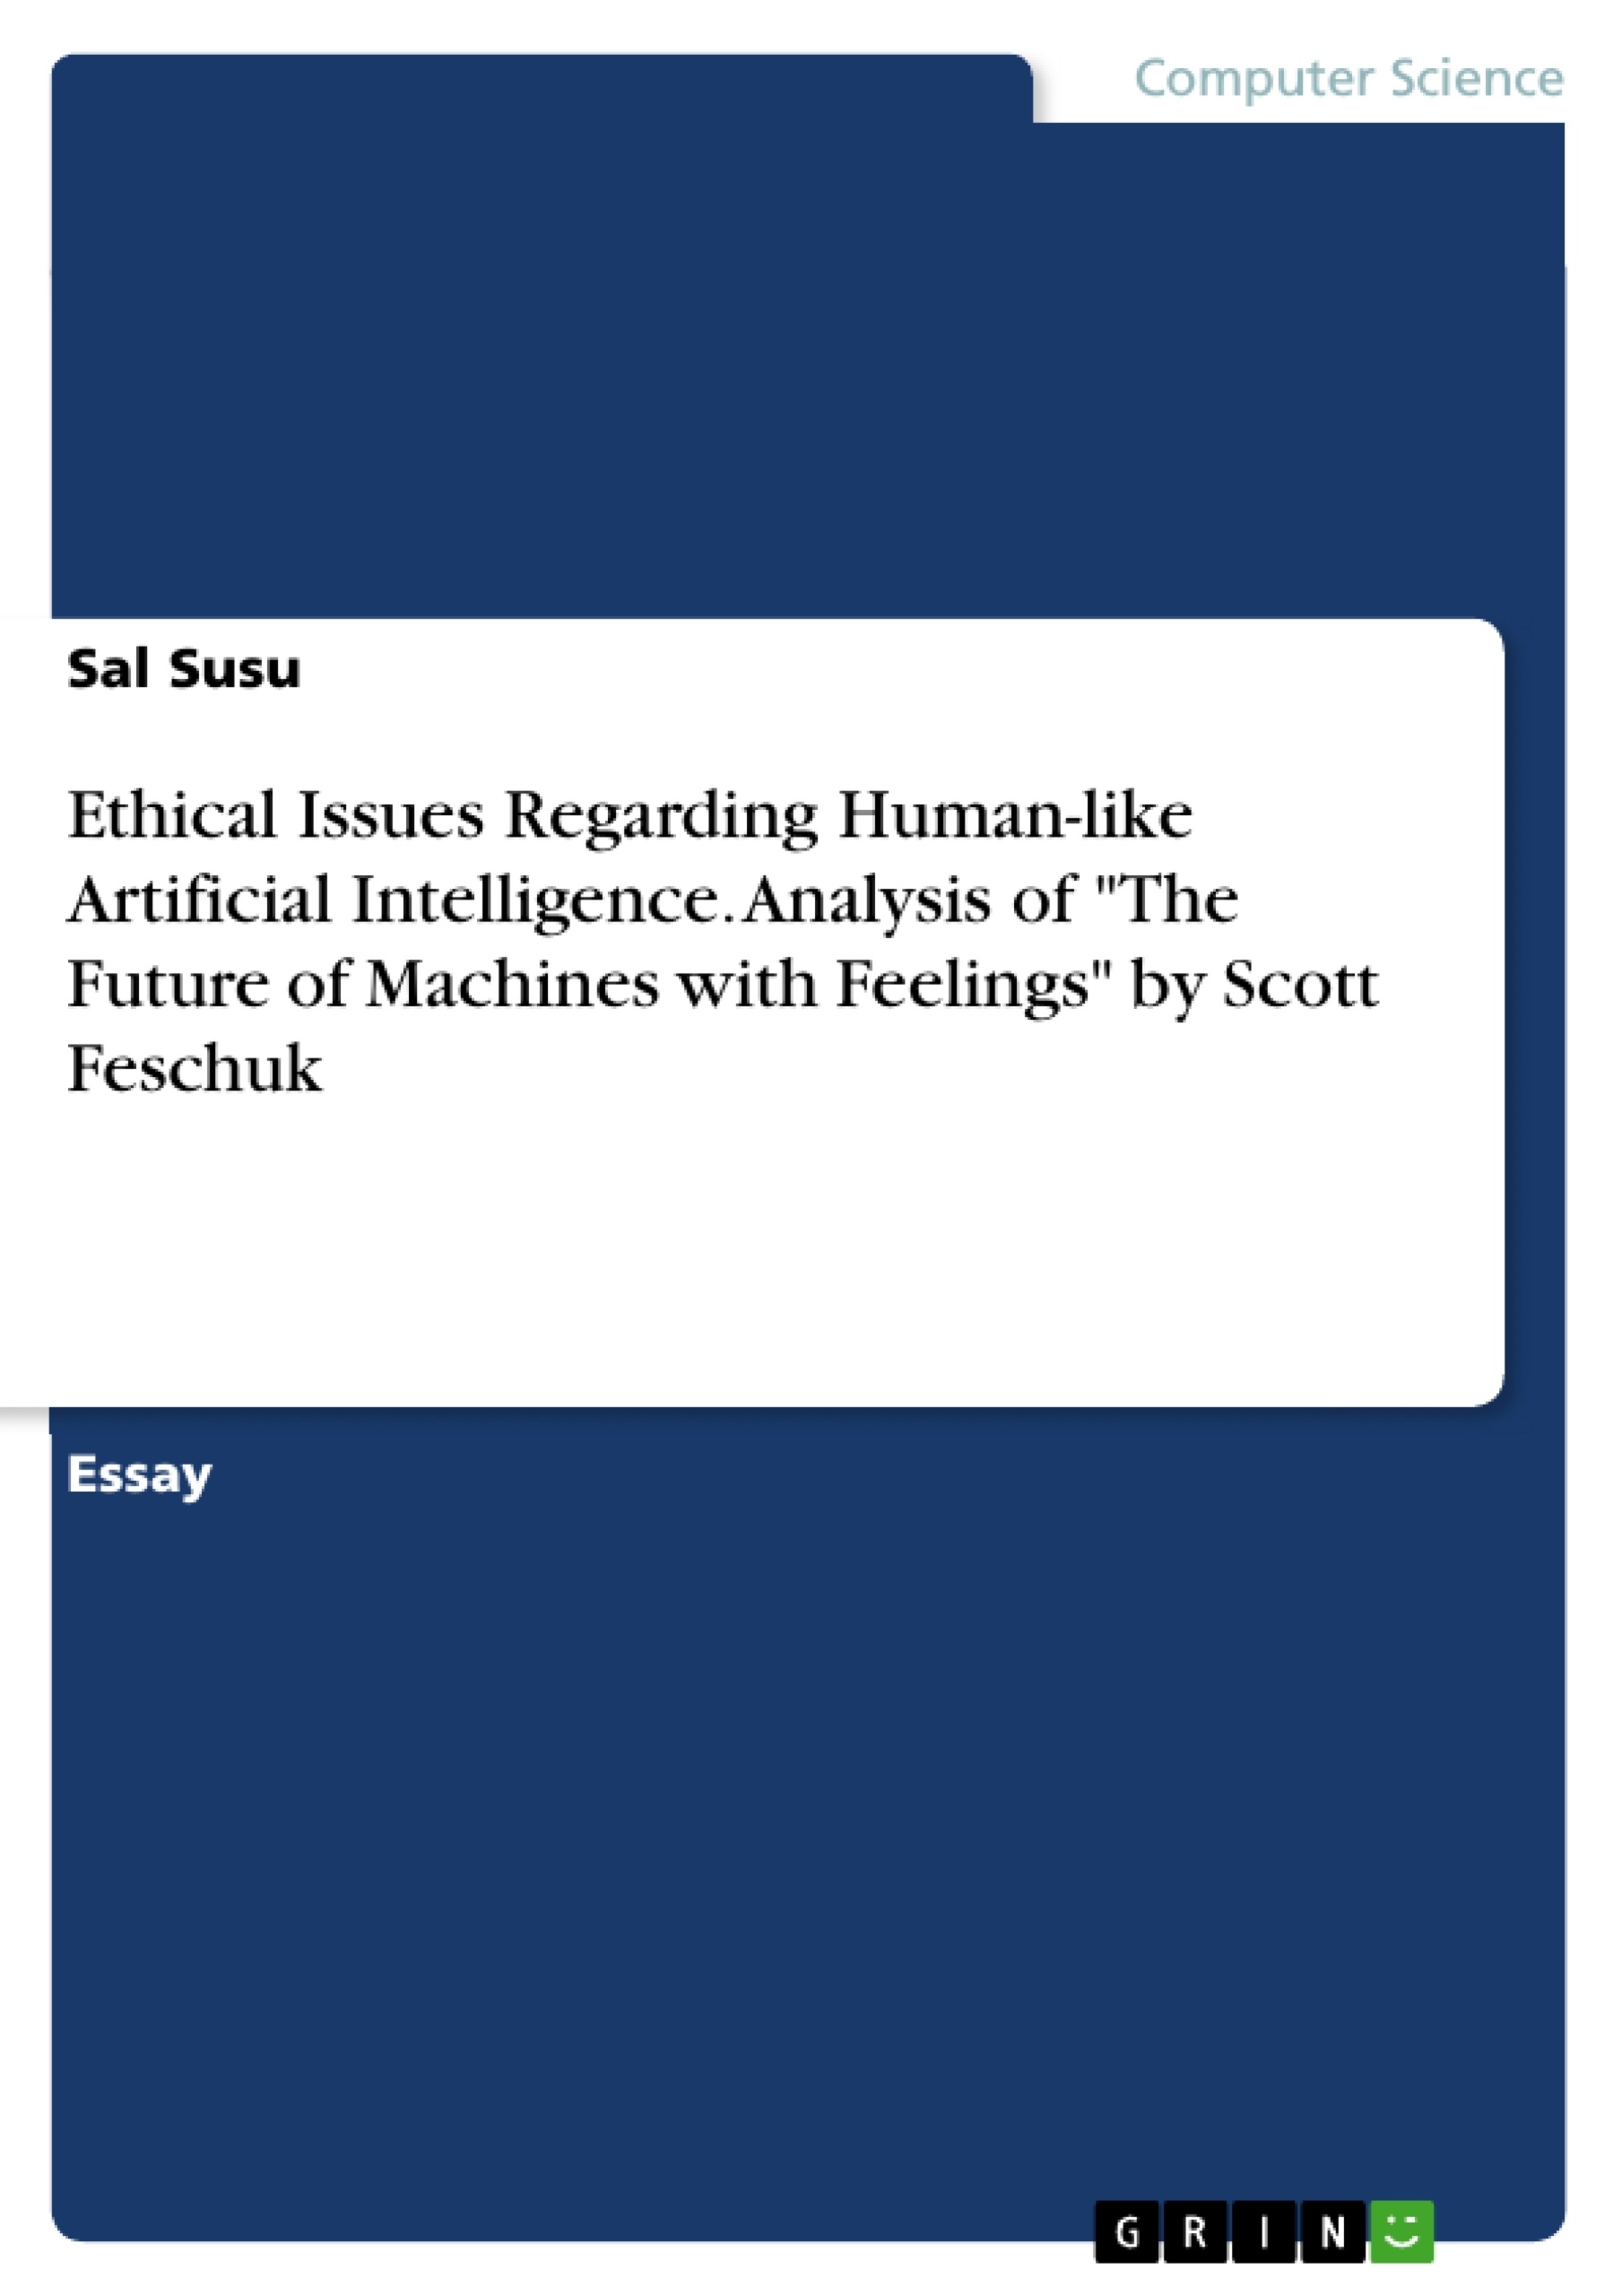 Titel: Ethical Issues Regarding Human-like Artificial Intelligence. Analysis of "The Future of Machines with Feelings" by Scott Feschuk